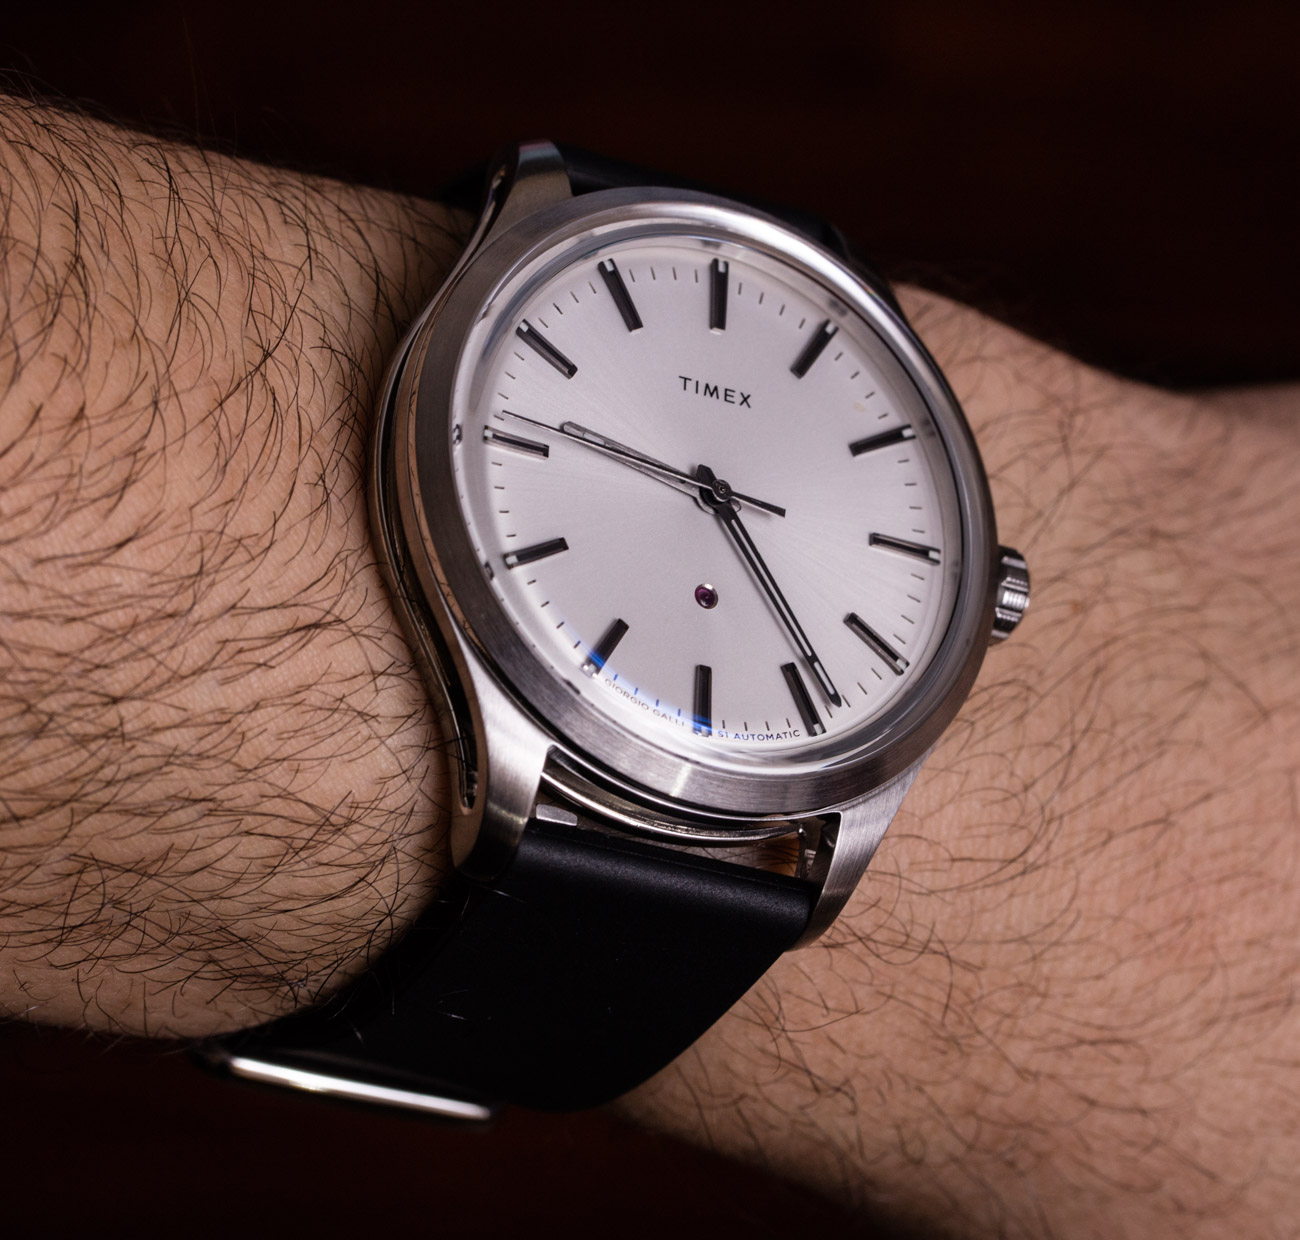 Hands-On Debut: Giorgio Galli S1 Automatic Watch By Timex